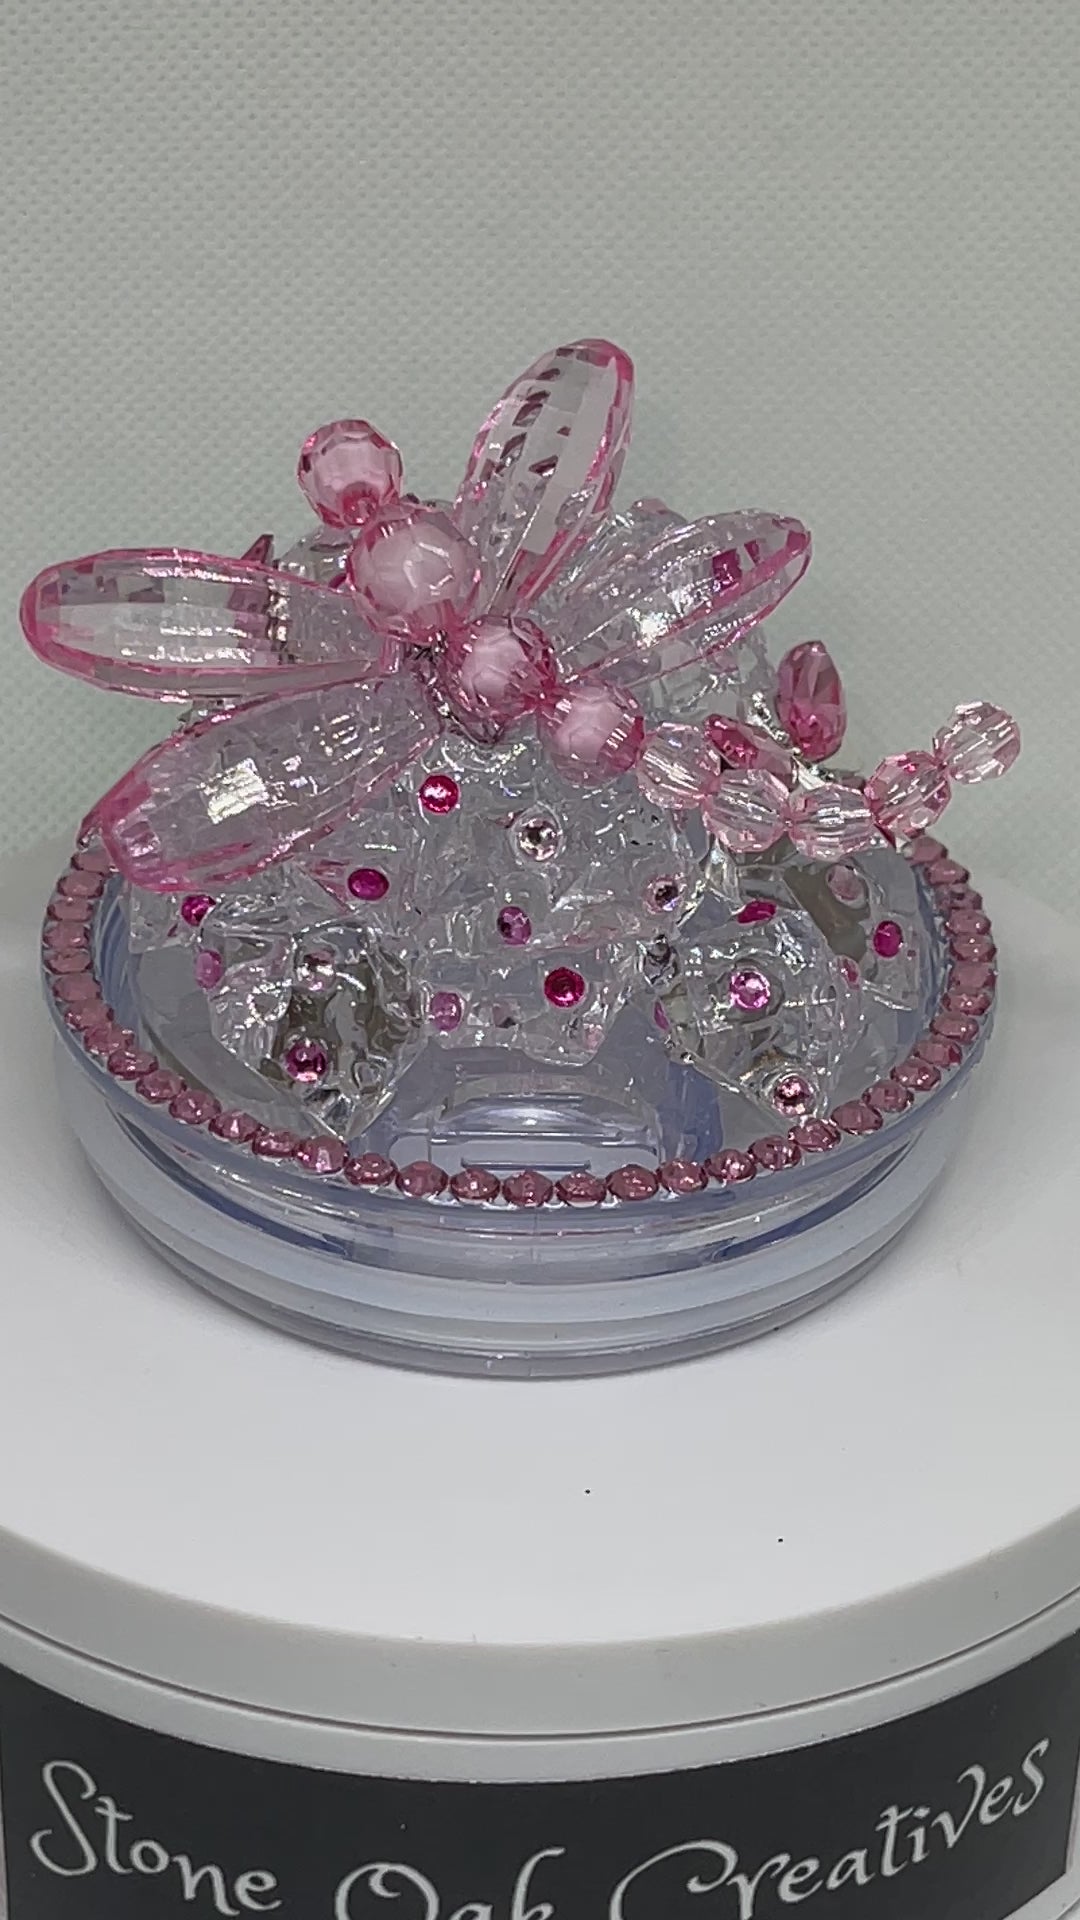 Rhinestone Dragonfly Tumbler Topper, Rhinestone Dragonfly 3D Decorative Lid, 3D Ice Topper Lid, unique gift